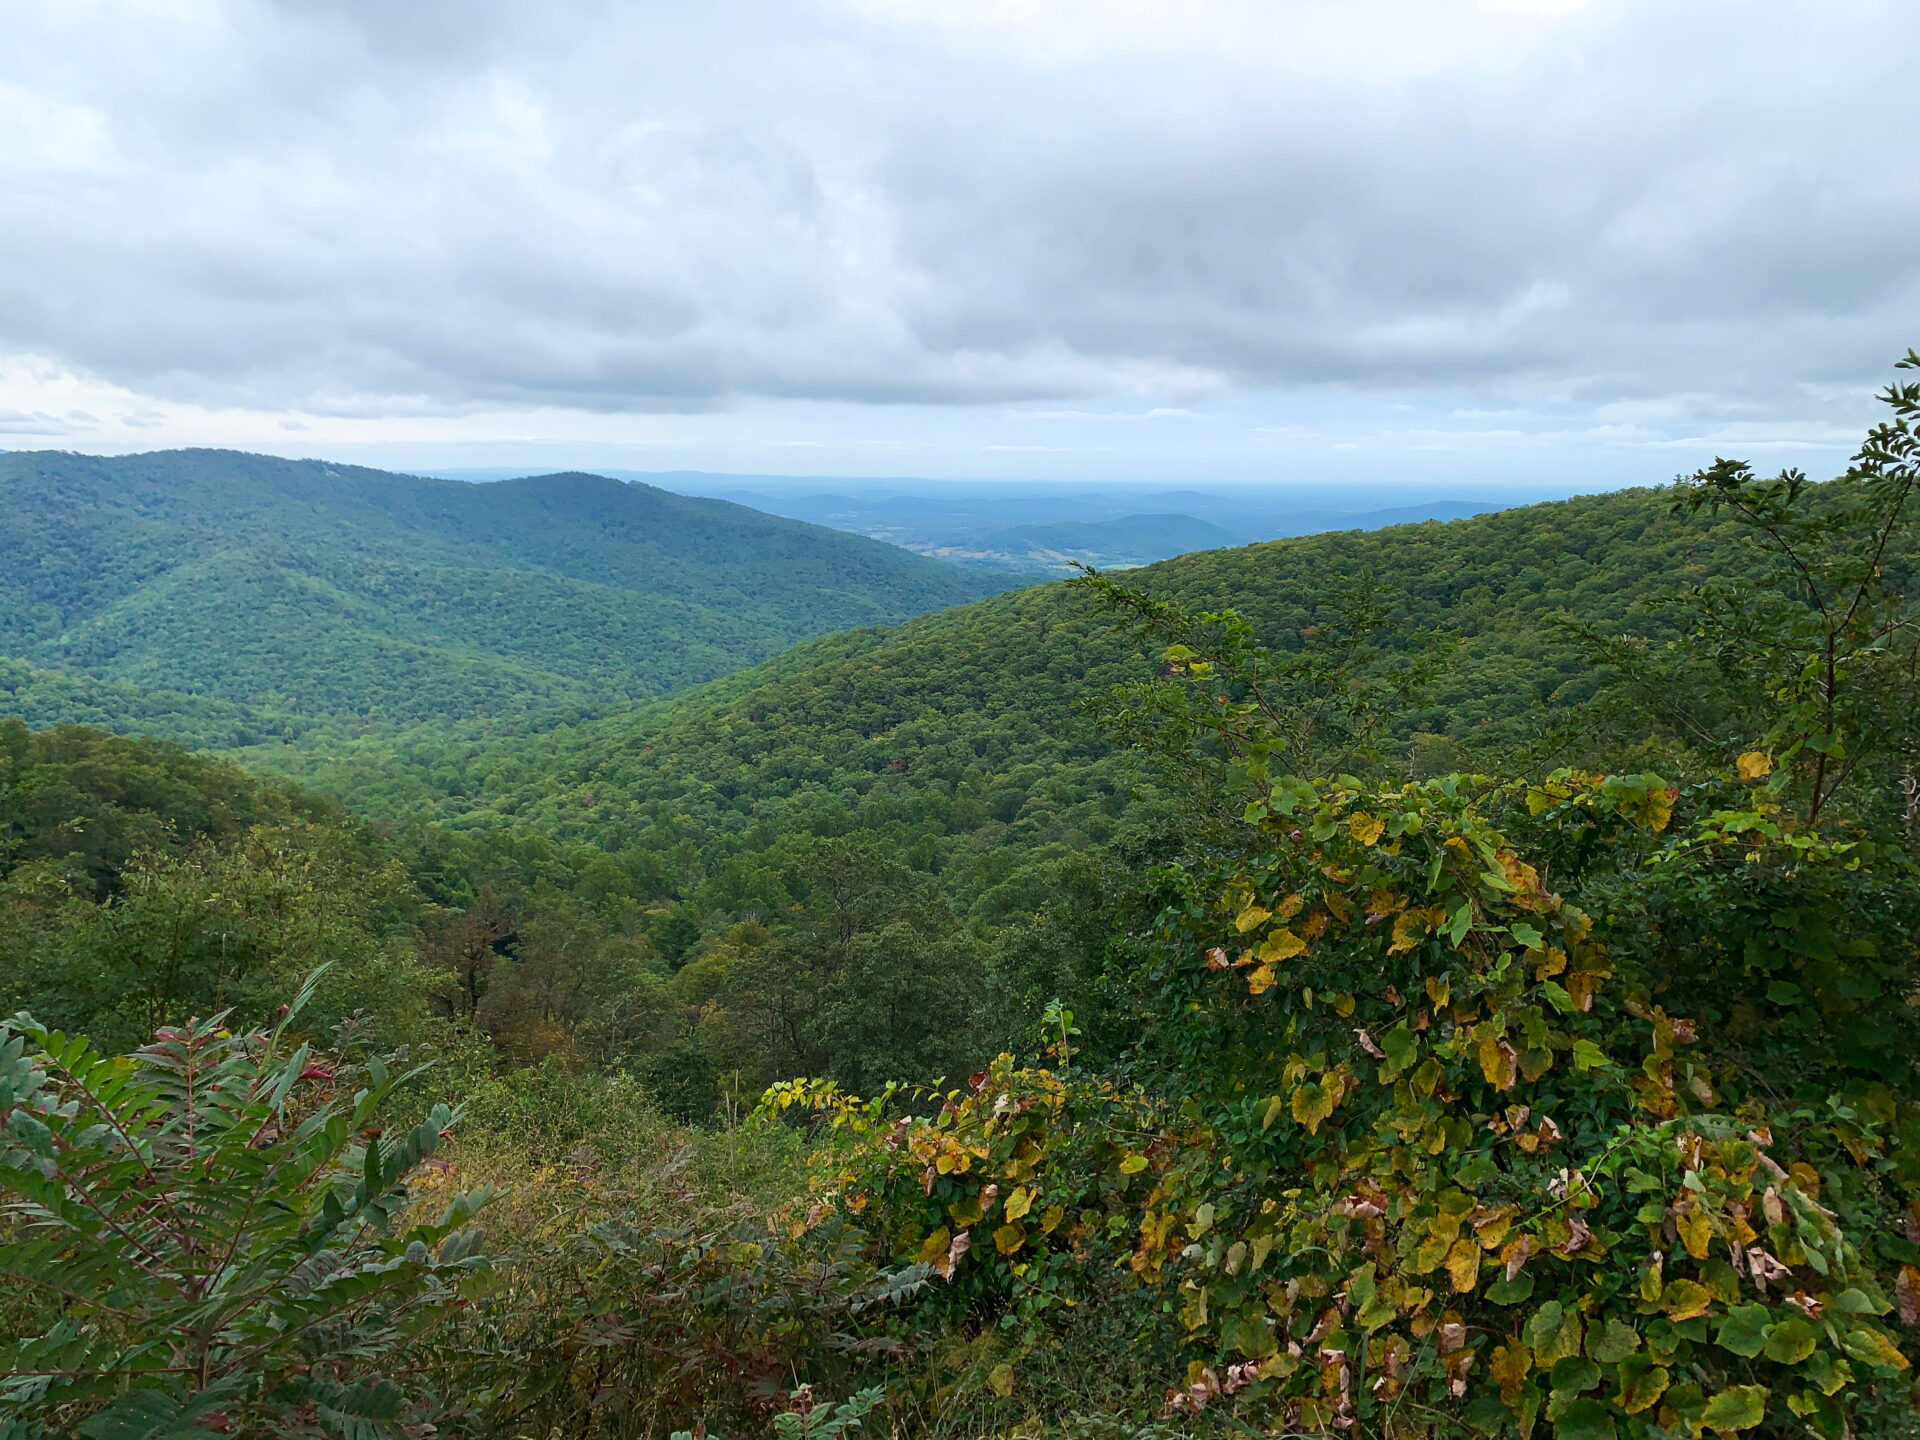 How to Spend One Day in Shenandoah National Park